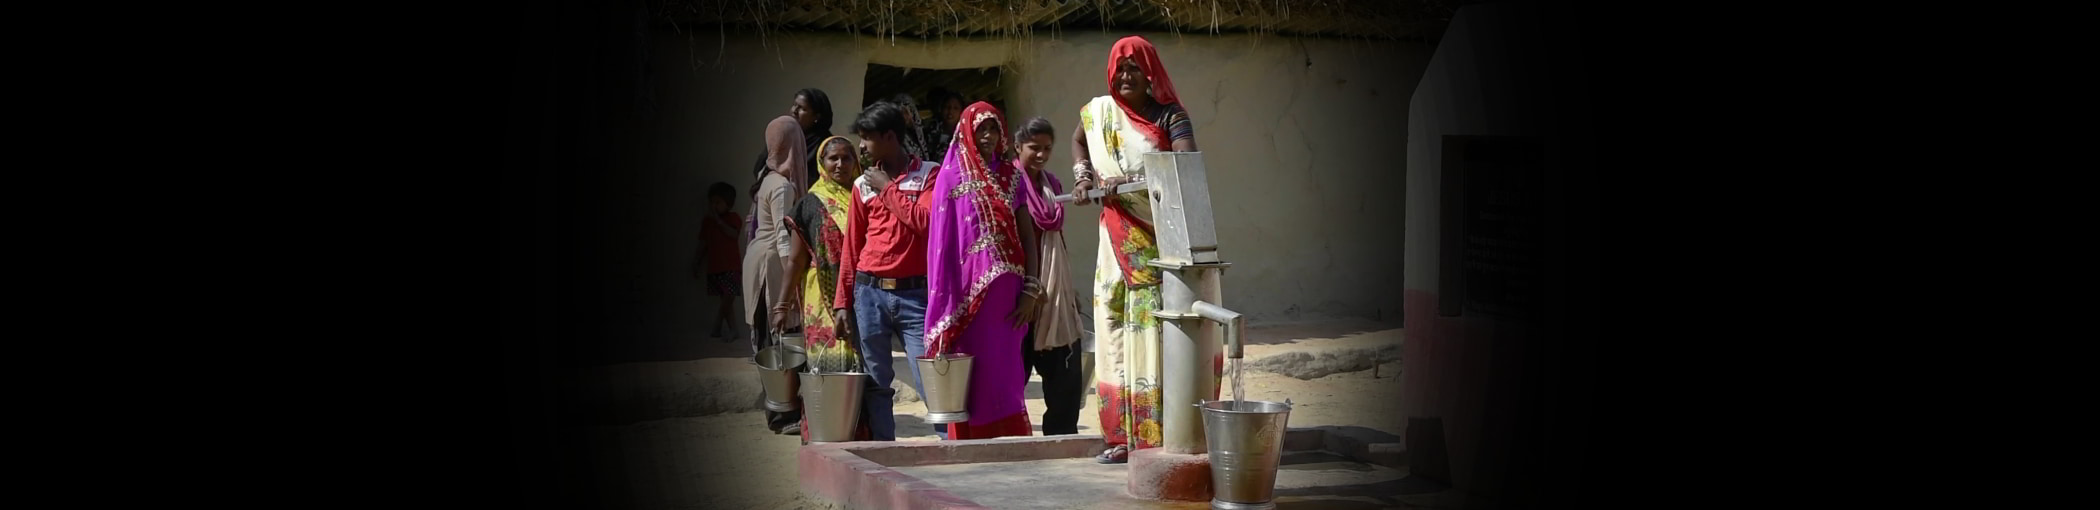 GFA World Clean Water Initiatives: Affordable Solutions for a Brighter Future